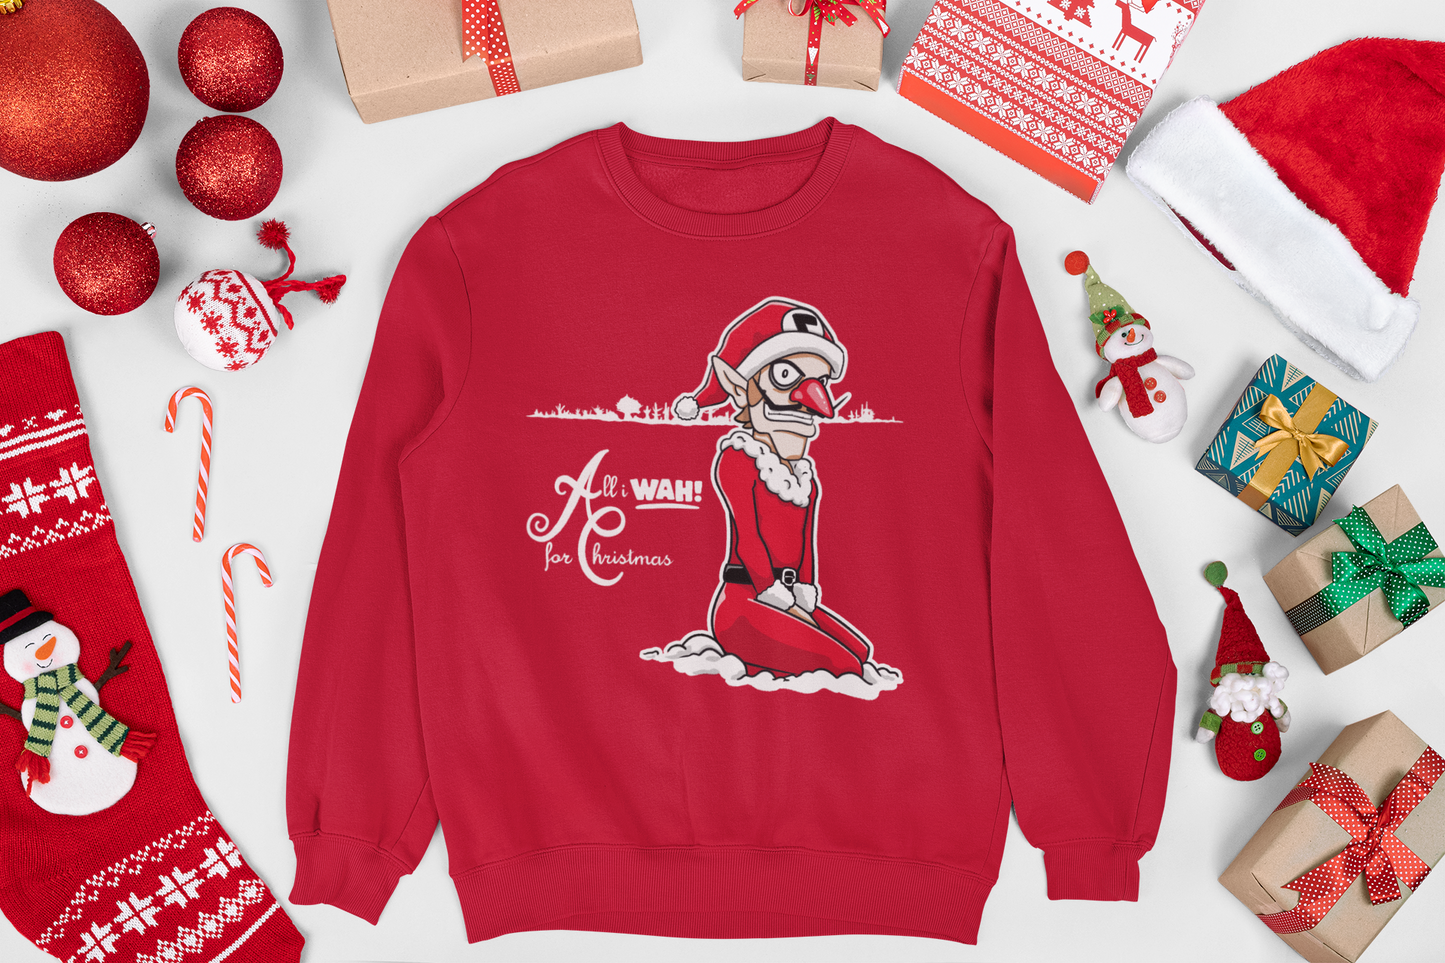 All I WAH! For Christmas - Red and Black Crewneck Sweatshirt Funny Gift for Gamers Nintendo Fans of Waluigi Geeky Christmas